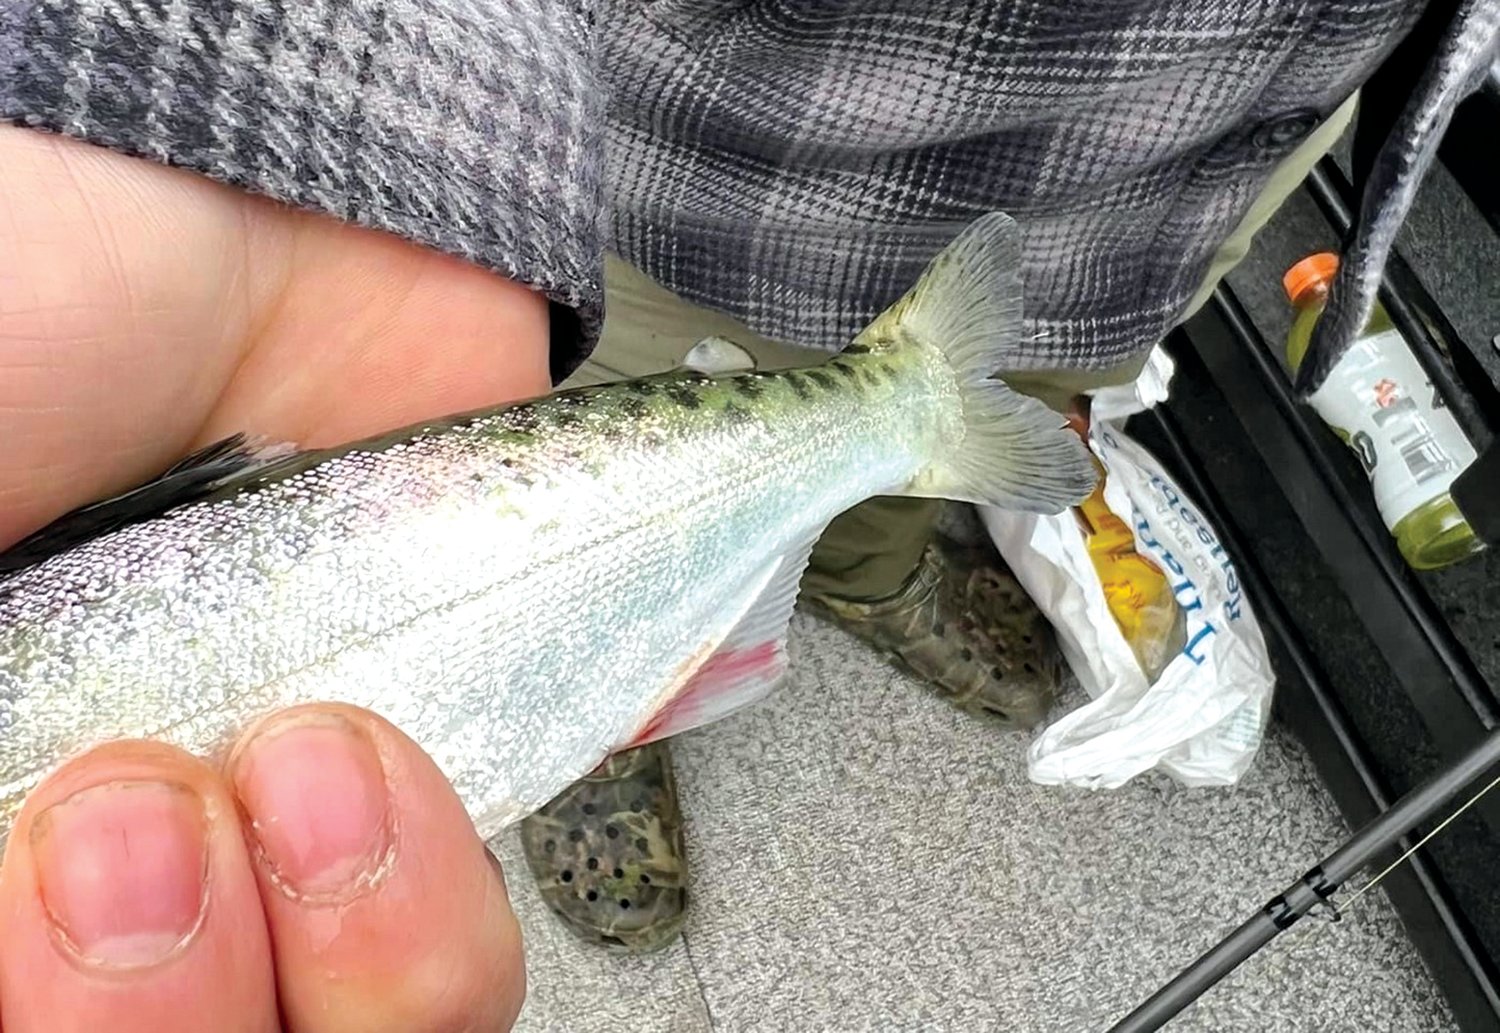 An unclipped, possibly hatchery-origin spring Chinook smolt caught in early April 2022 on the Cowlitz River below Barrier Dam, approximately 8 inches in length.